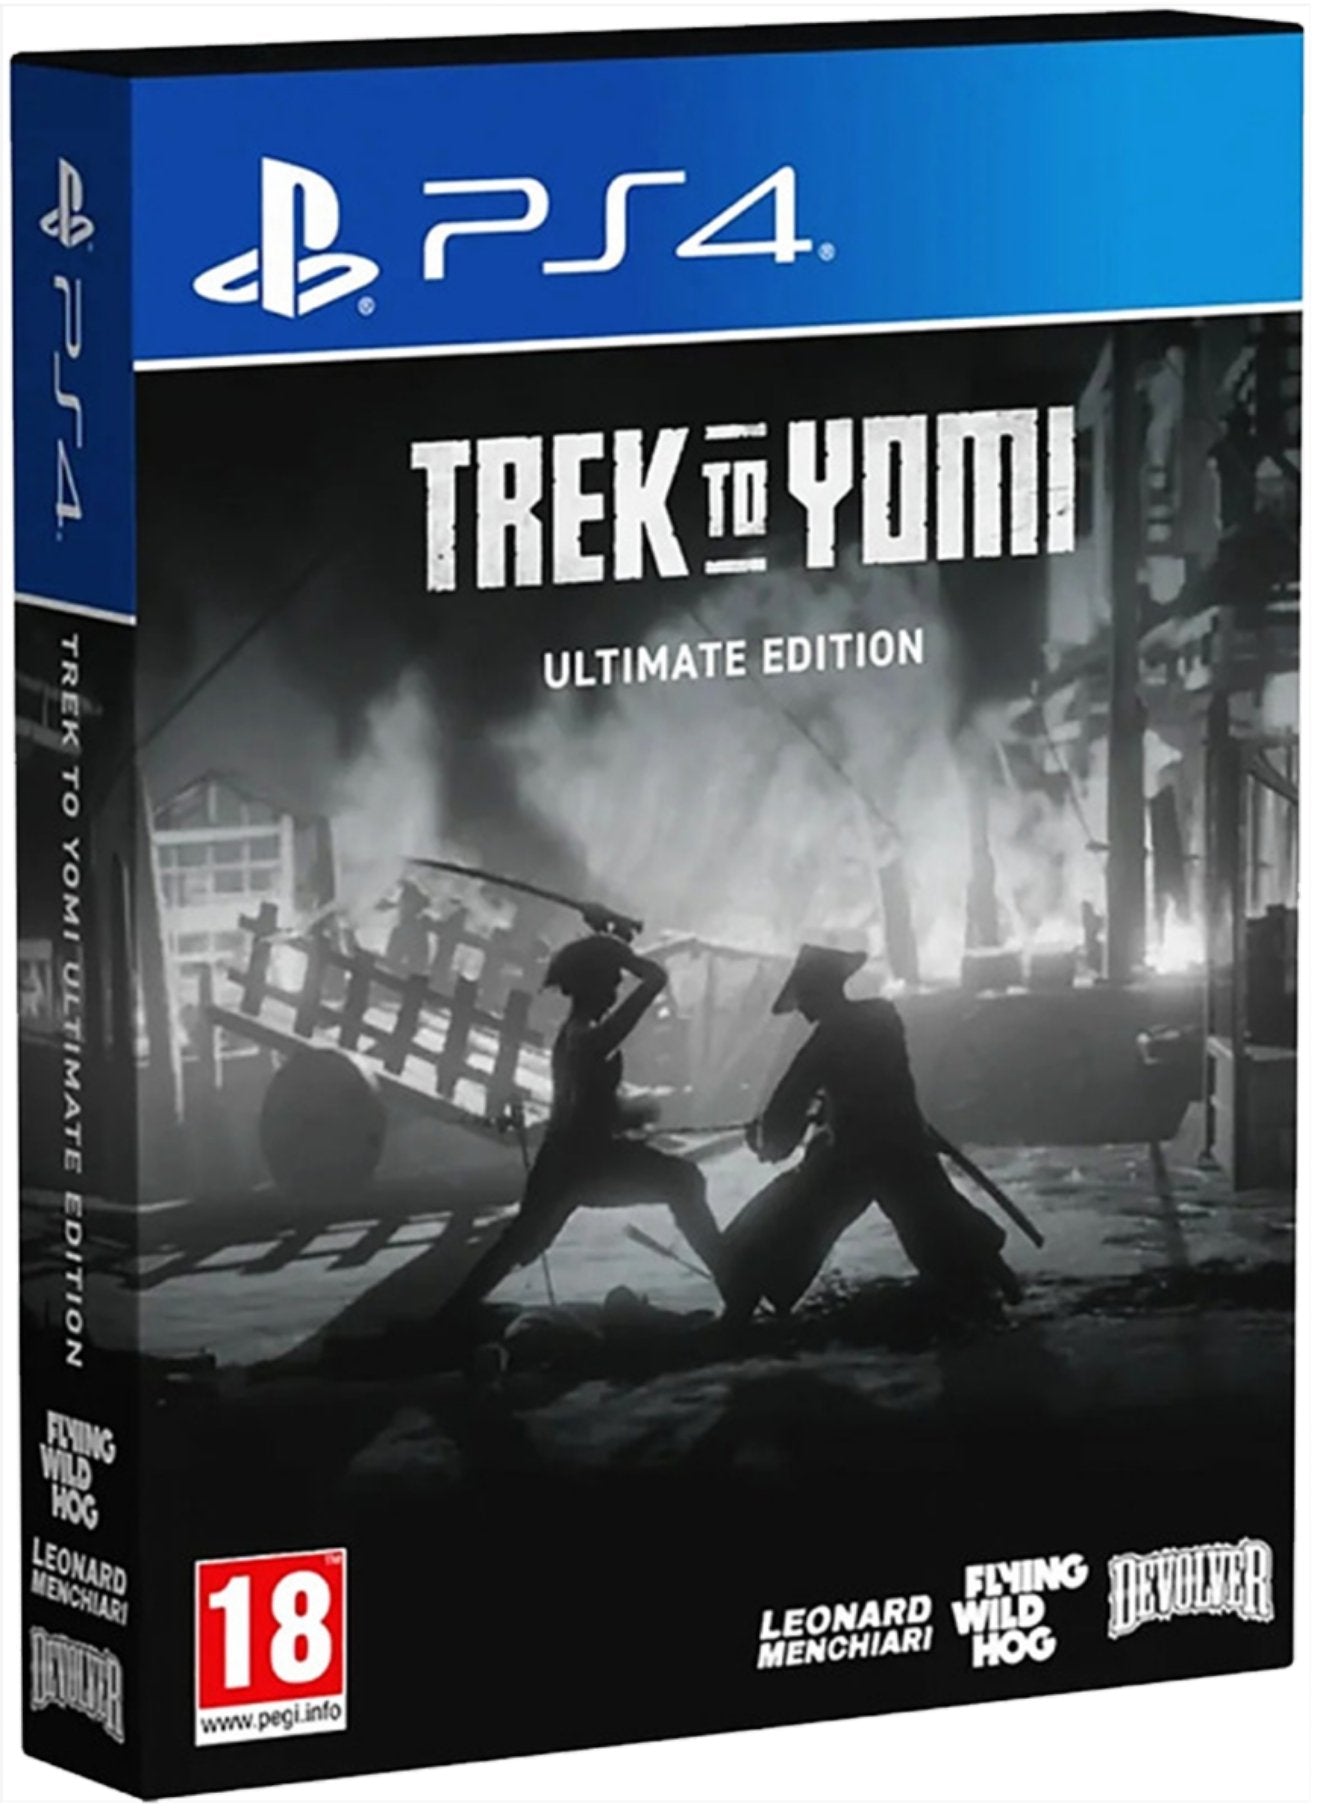 TREK TO YOMI ULTIMATE EDITION PS4 - EasyVideoGame